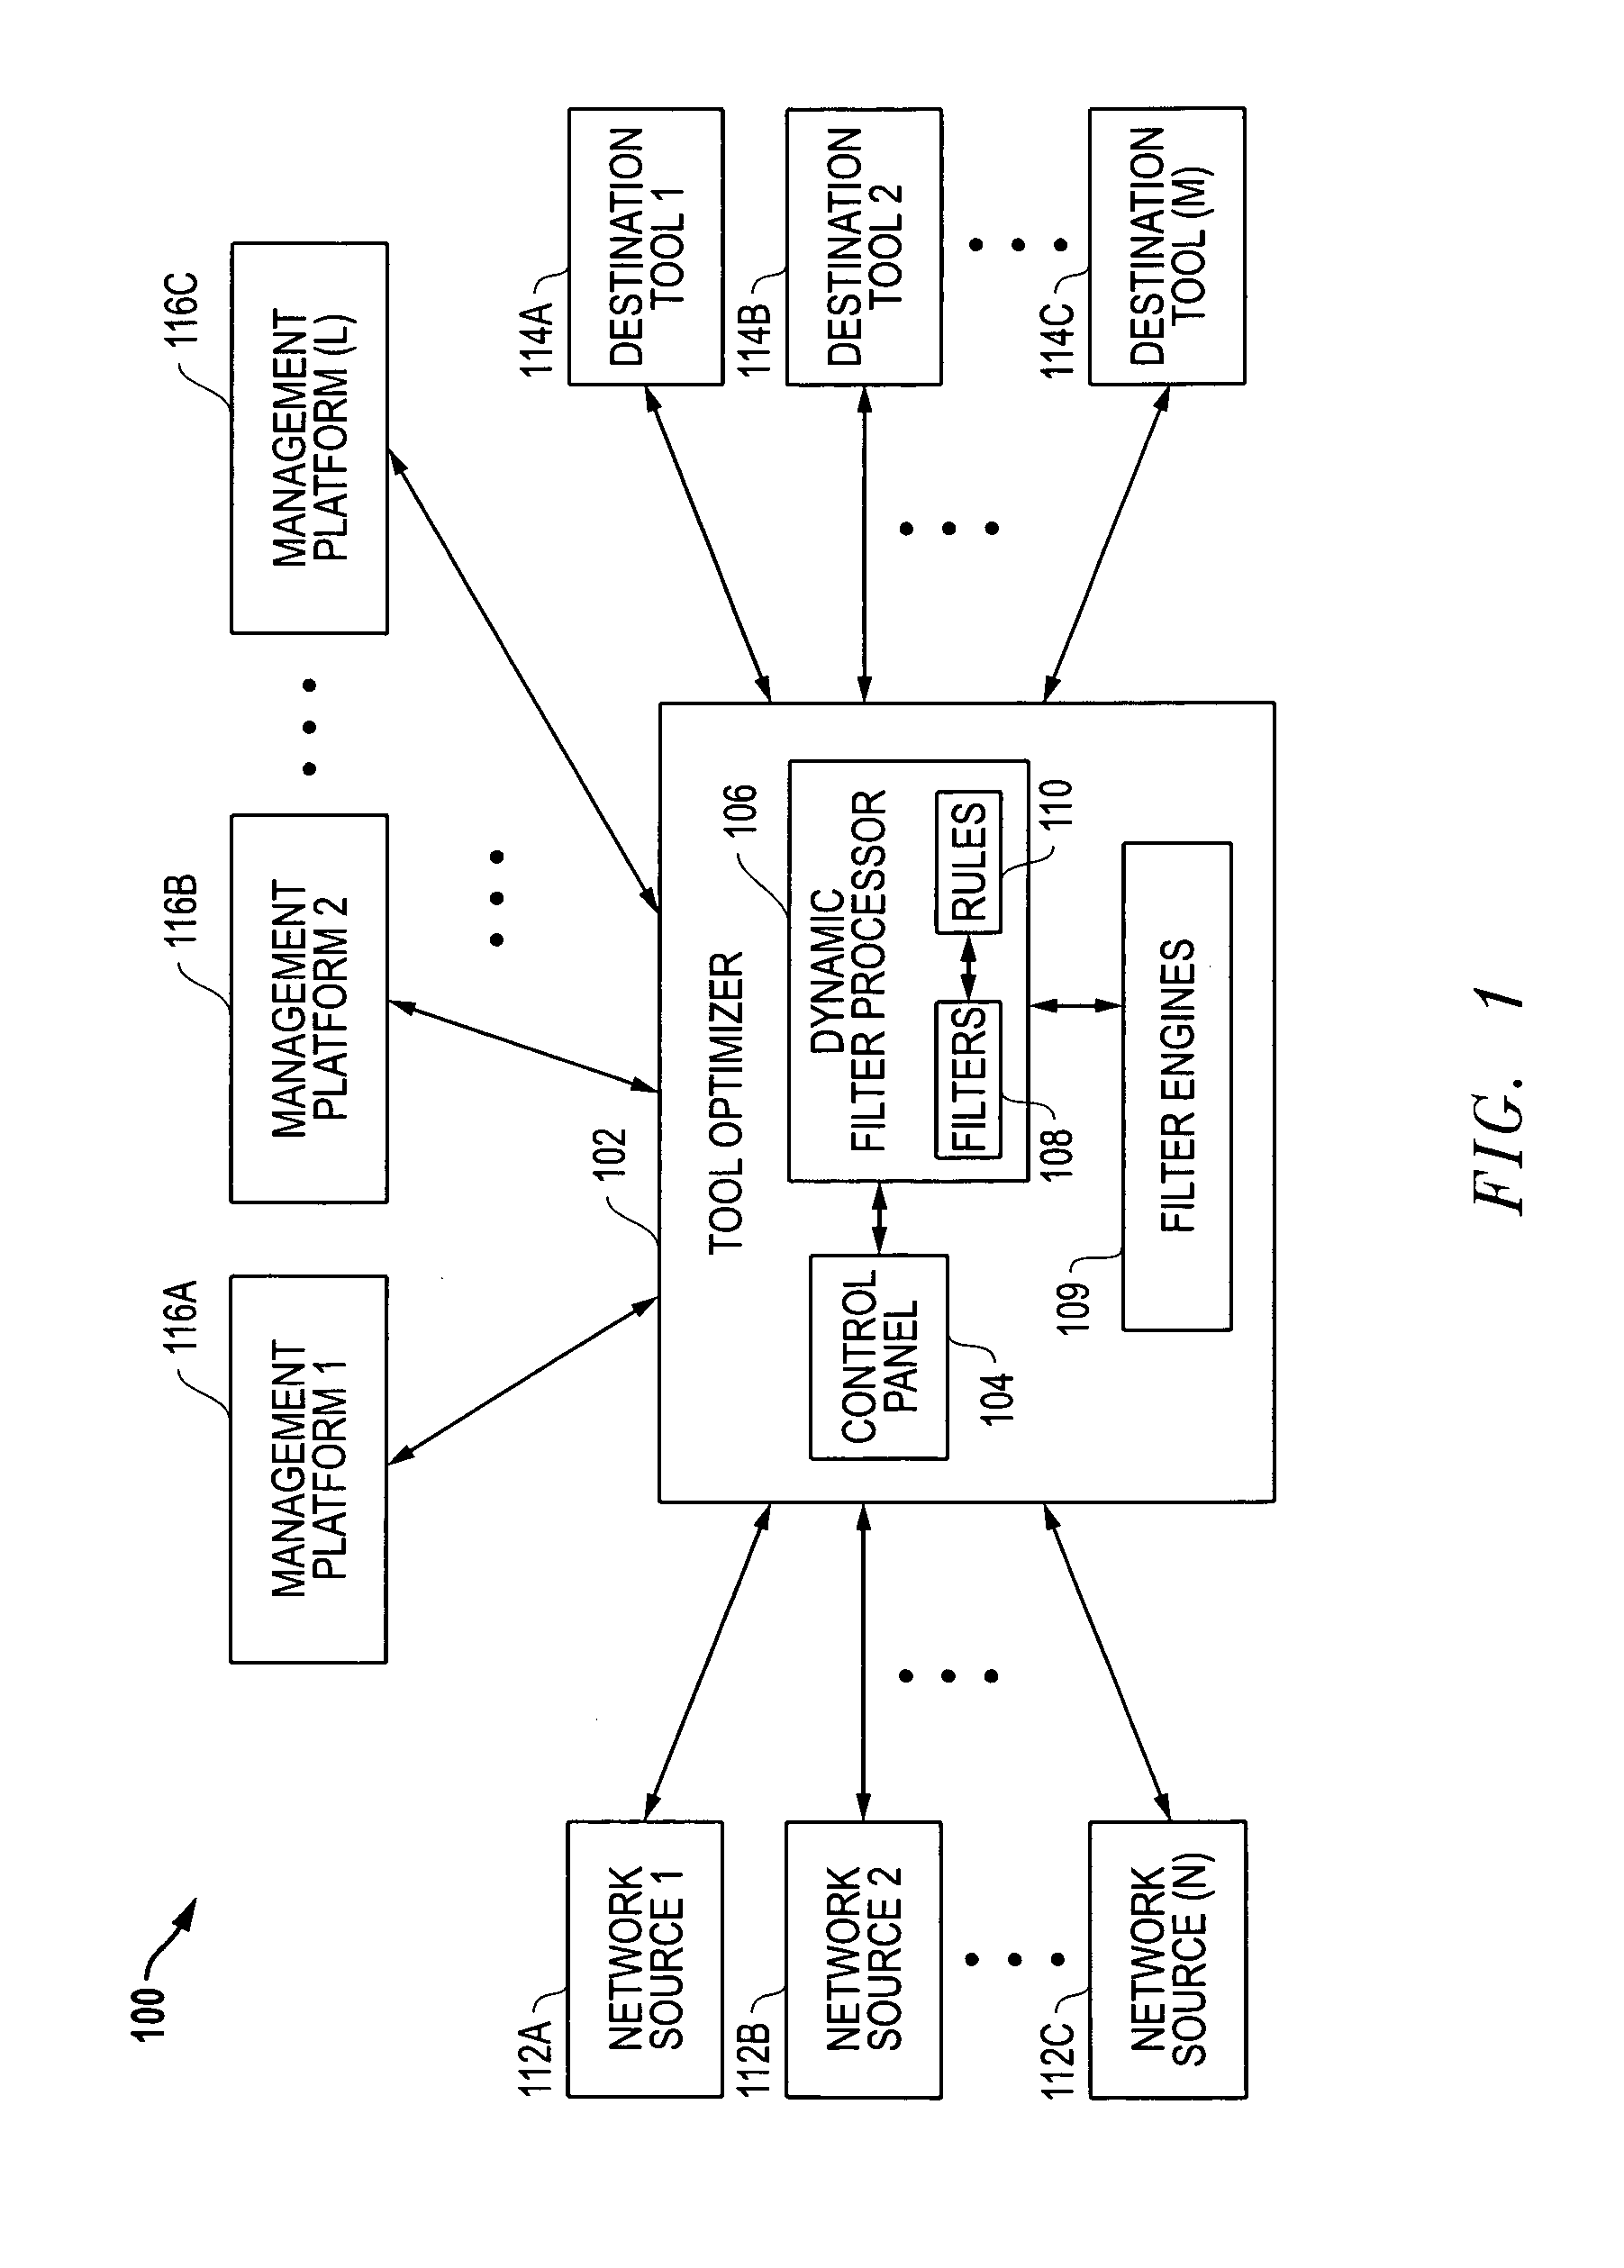 Automatic filter overlap processing and related systems and methods